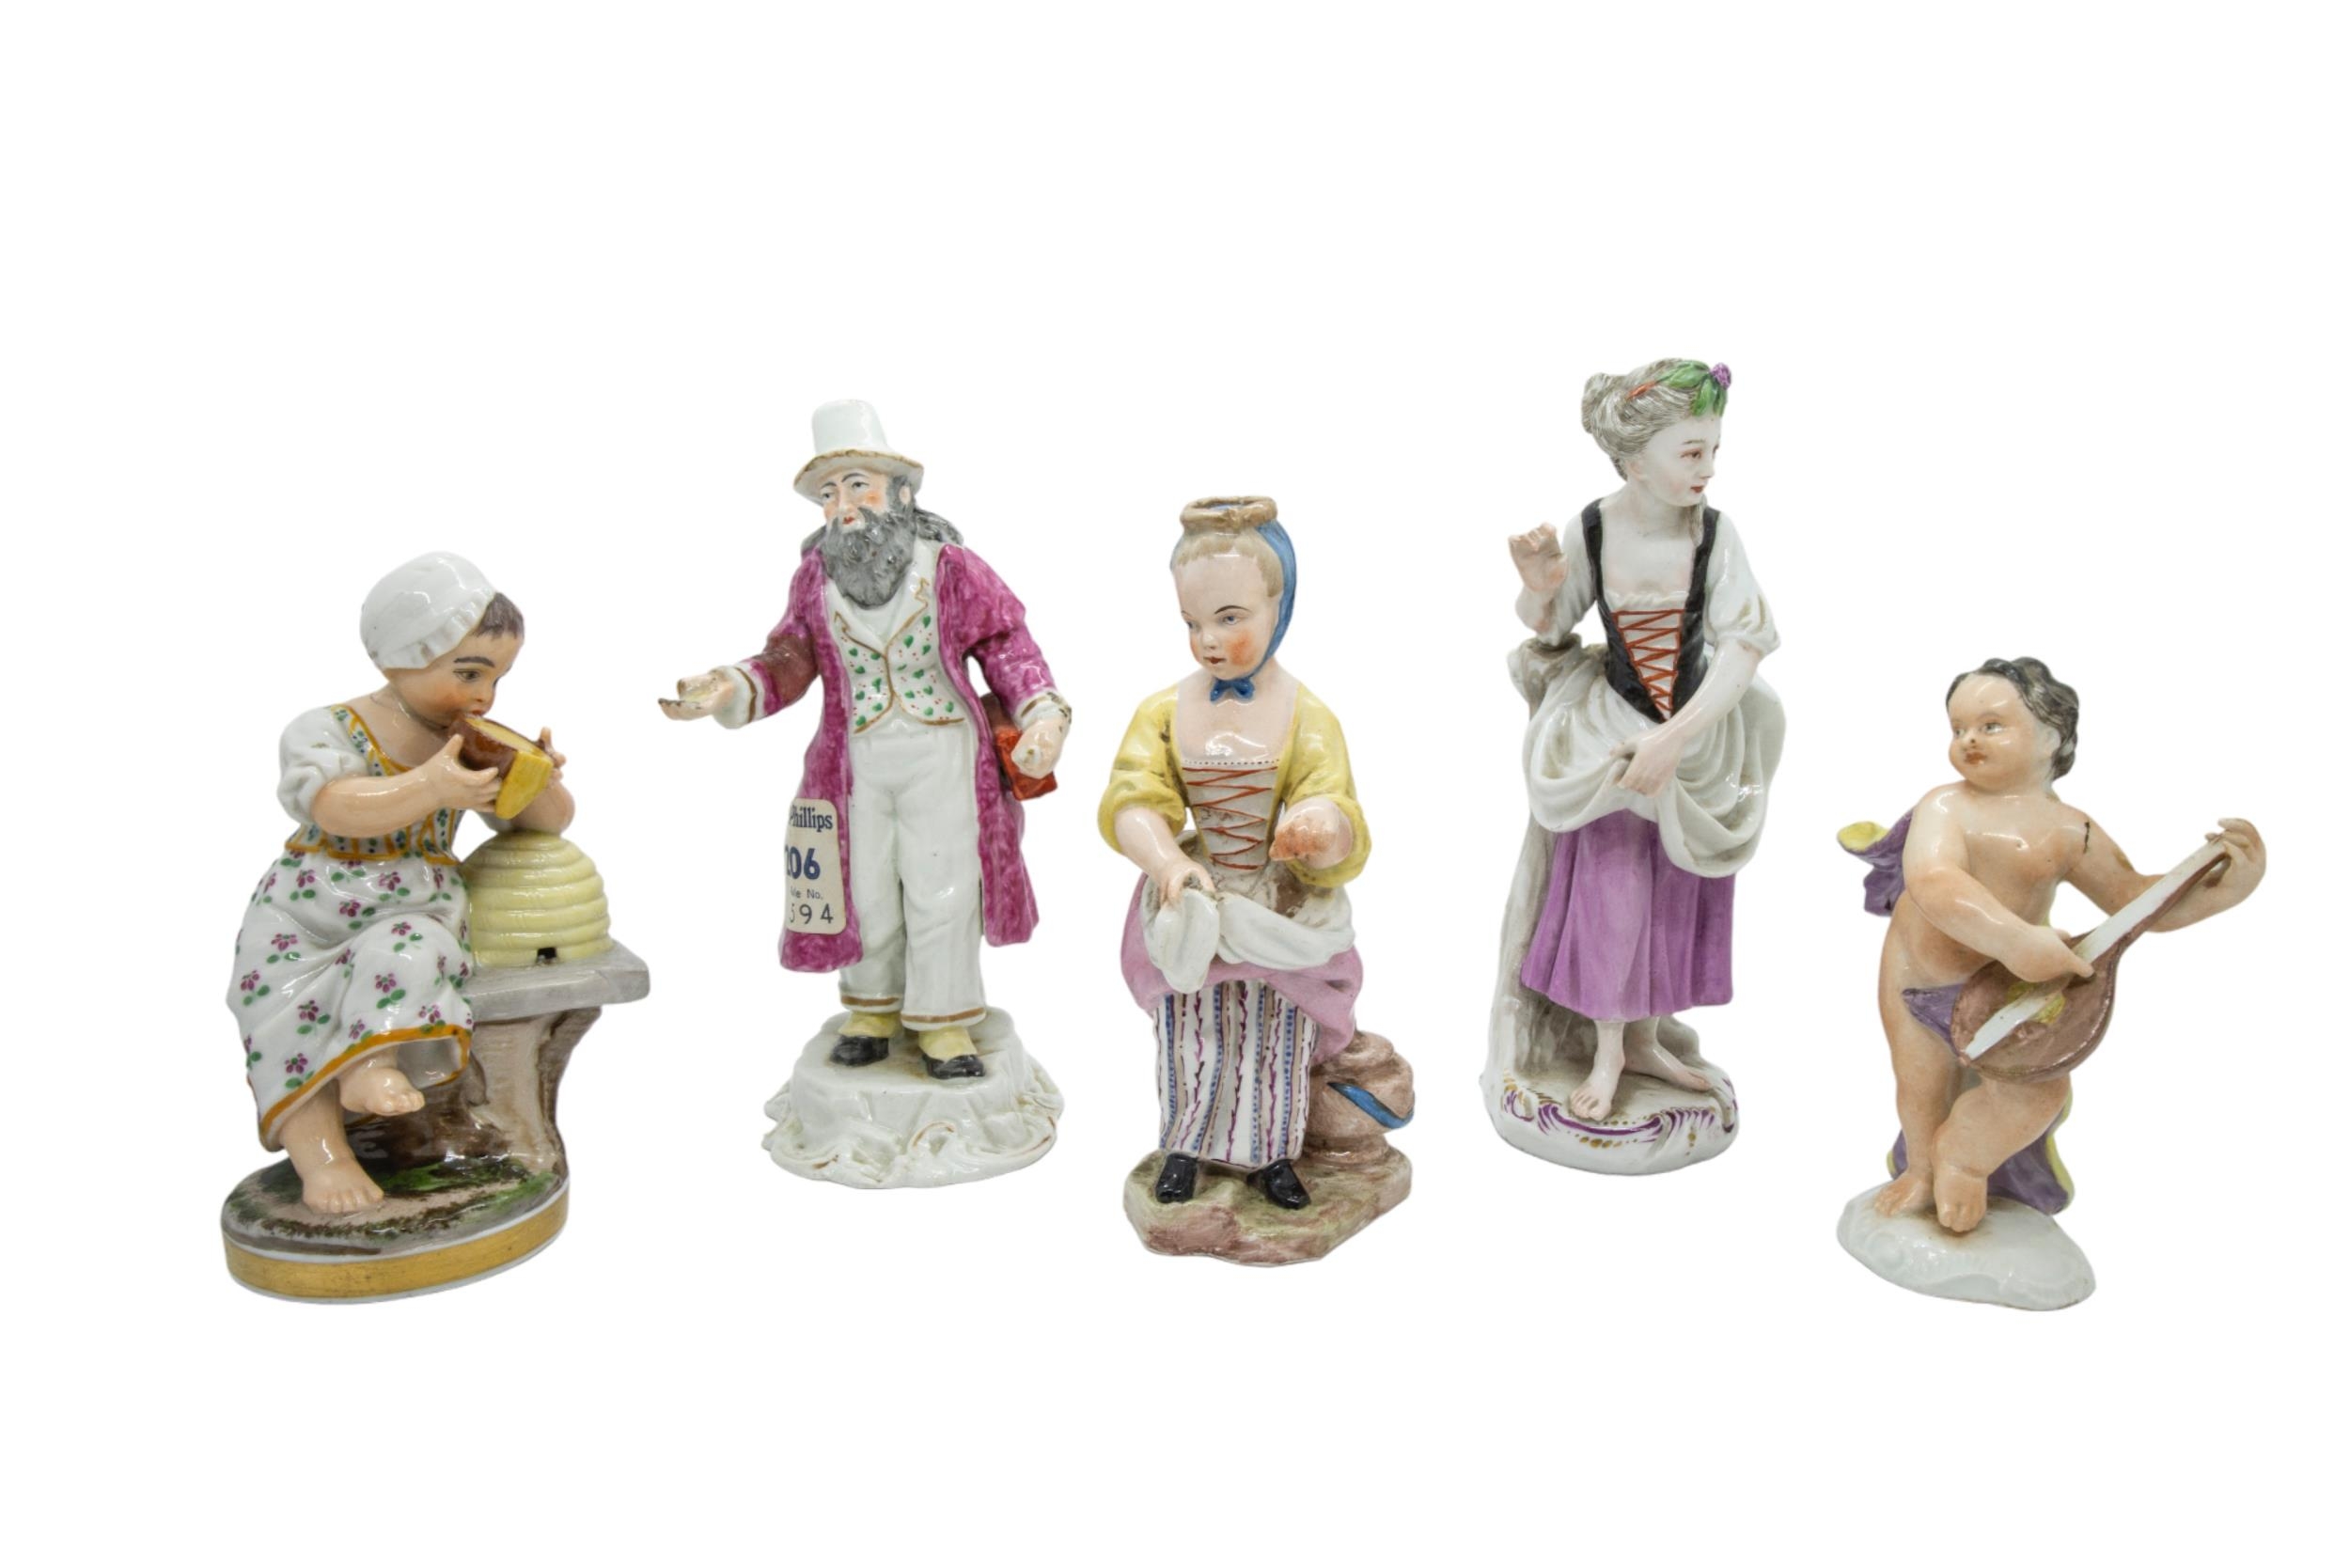 A MIXED GROUP OF FIVE PORCELAIN FIGURES, 18TH/19TH CENTURY, the lot includes a figurine of a girl, - Image 3 of 3